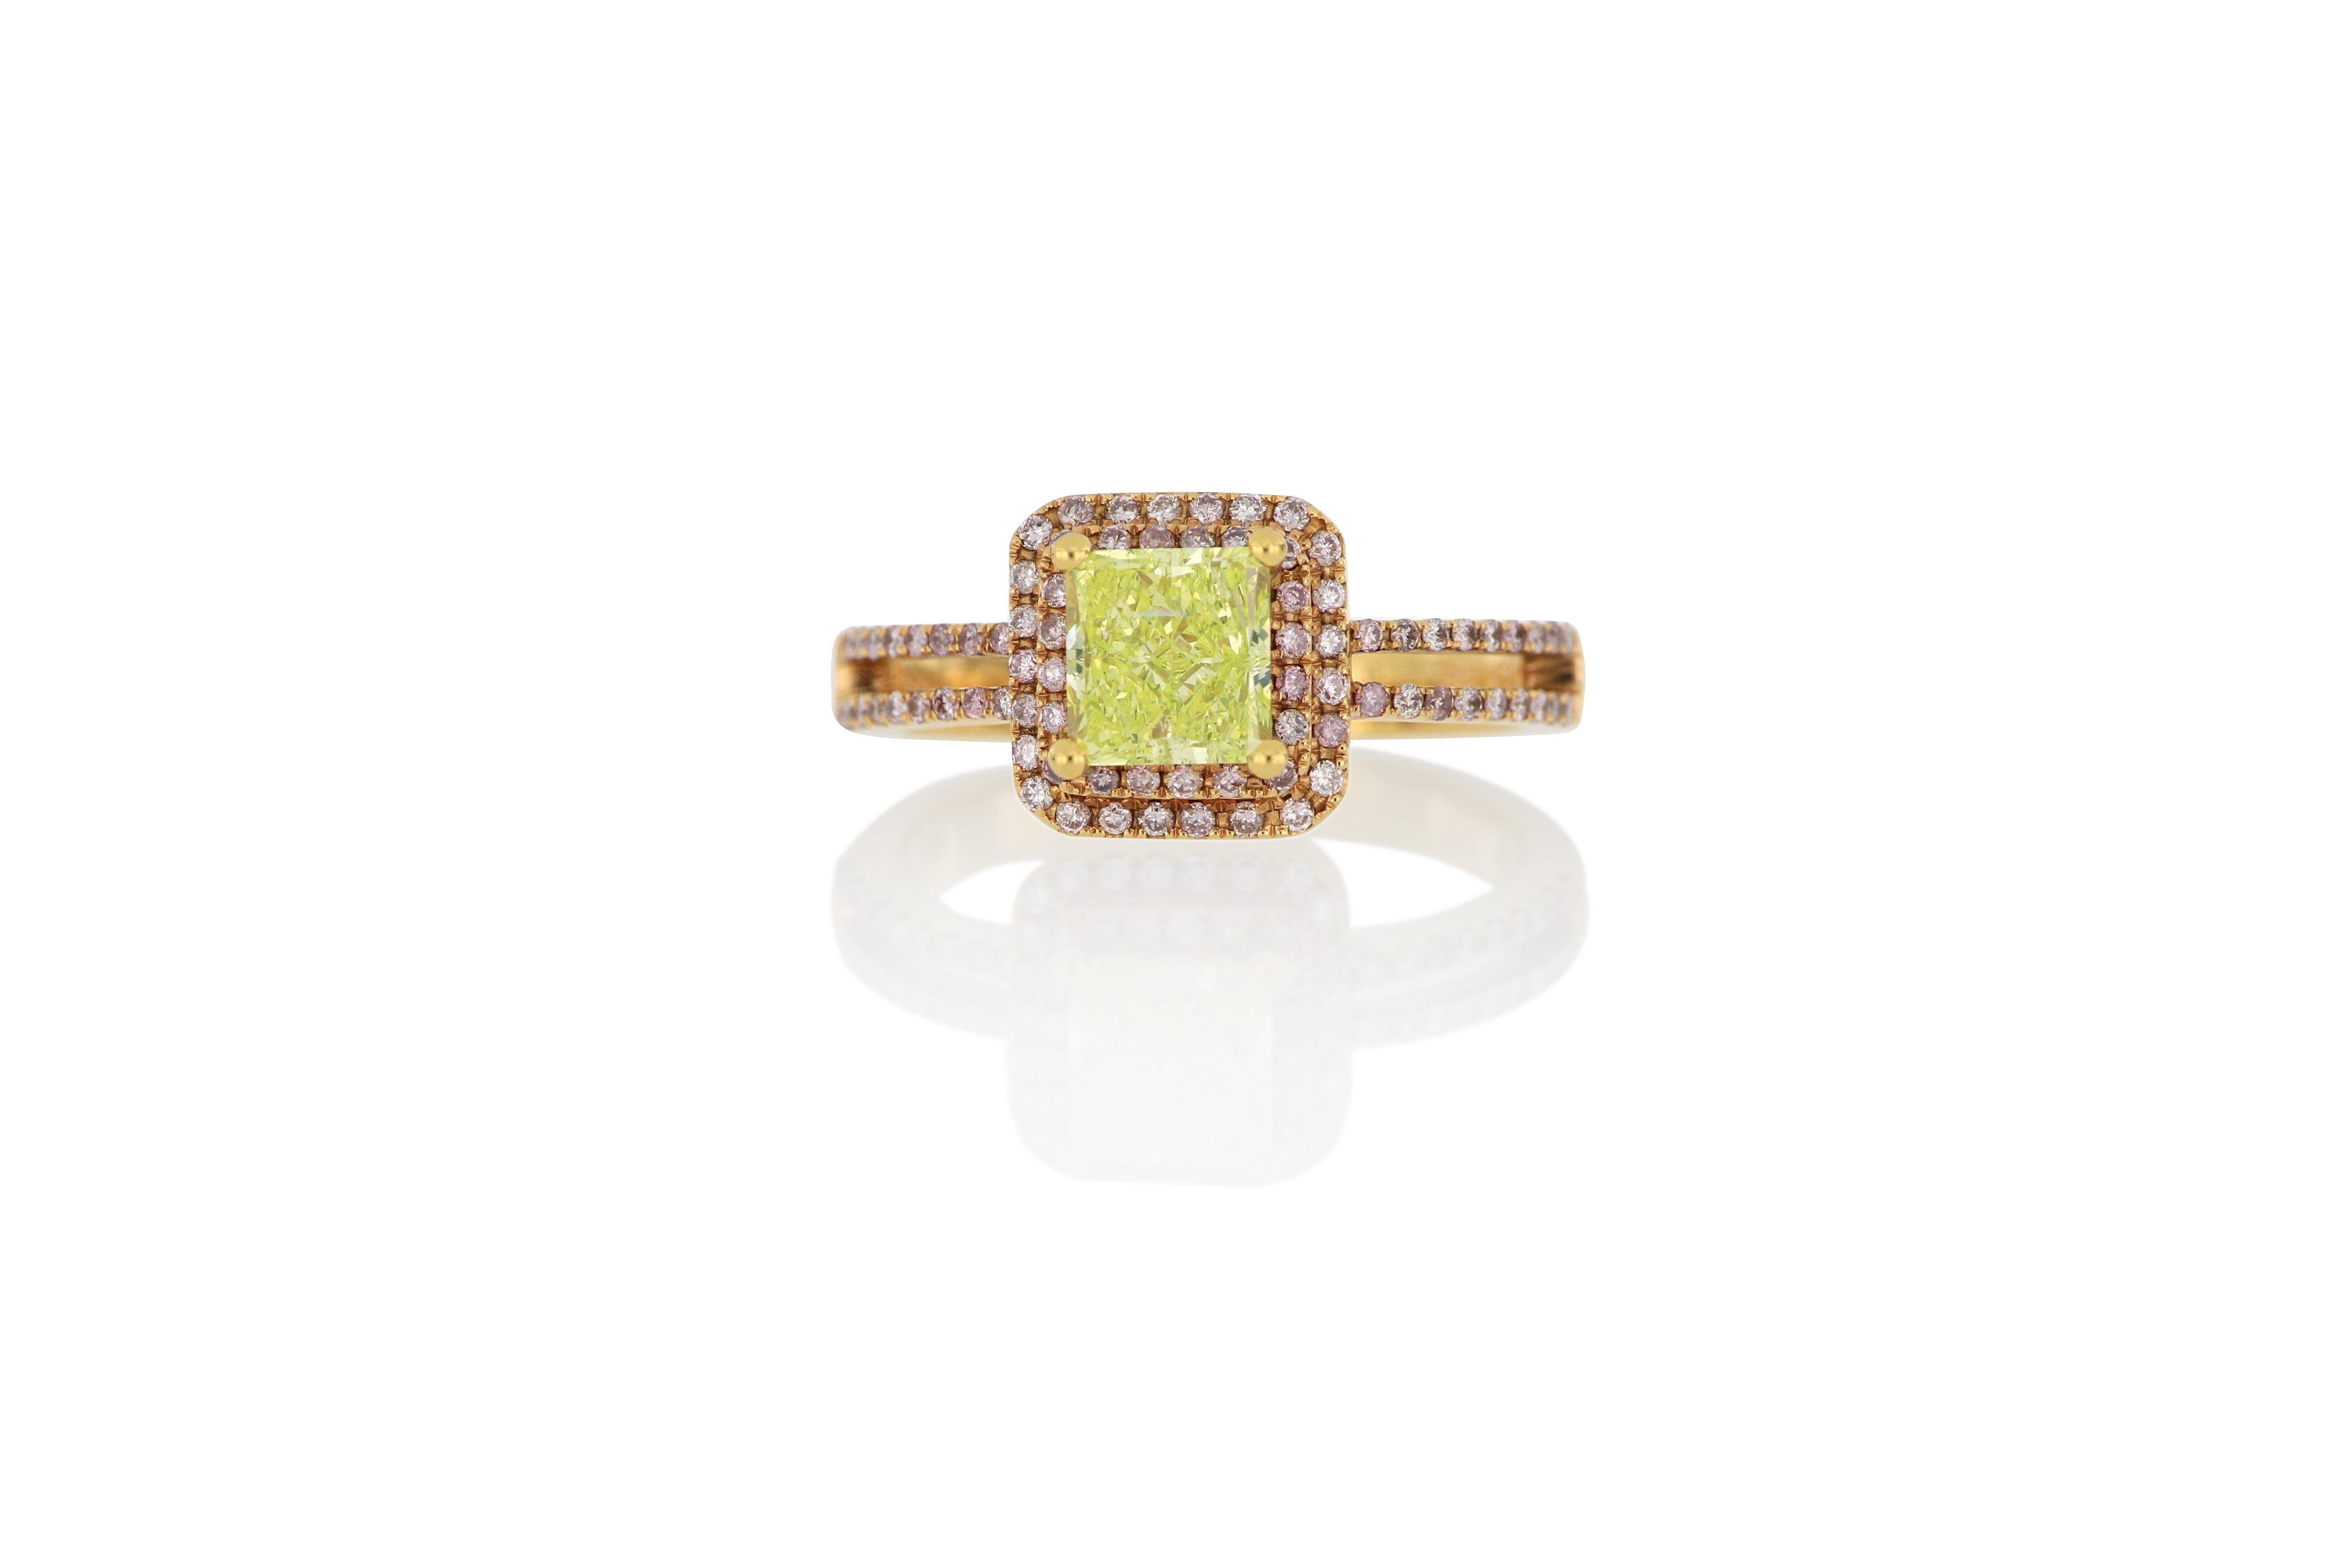 A natural coloured diamond ring, centering a rare square modified brilliant-cut natural Fancy Intense Green Yellow diamond weighing  1.04 carats, surrounded by natural pink diamonds, mounted in 18 Karat rose gold.
Accompanied by report from